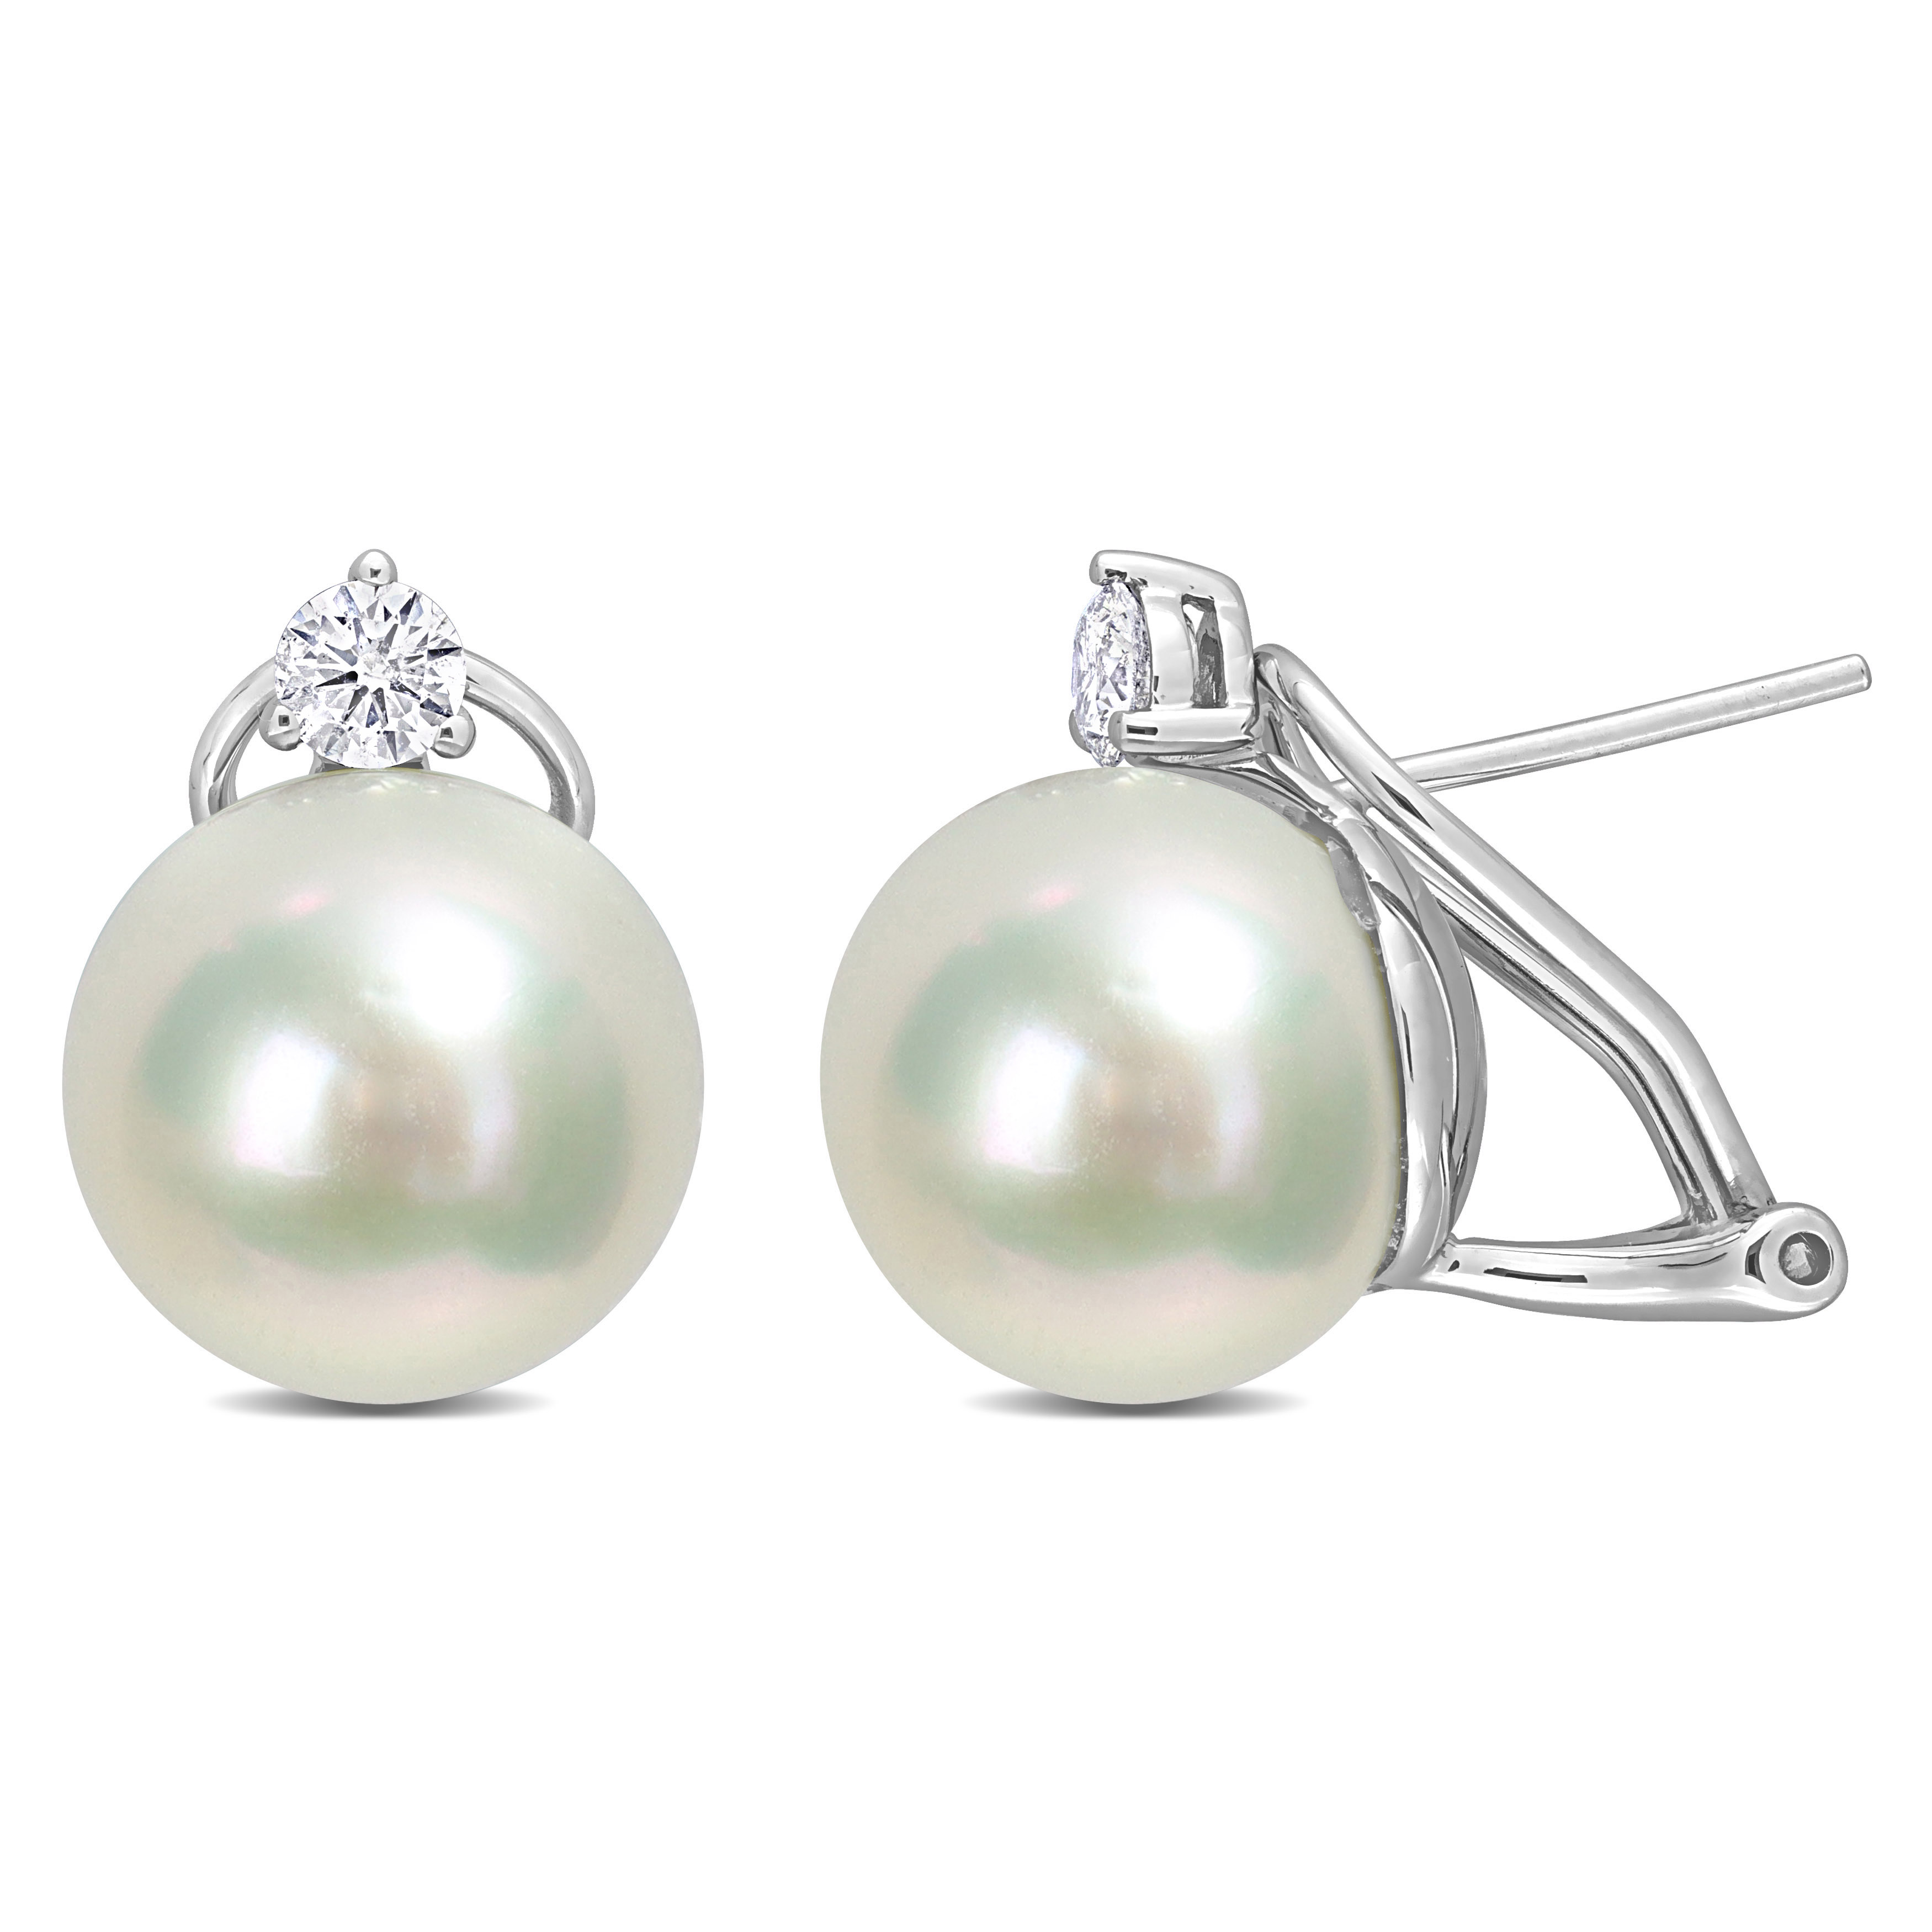 12-12.5 MM South Sea Cultured Pearl and 3/8 CT TW Diamond Clip-Back Earrings in 14k White Gold